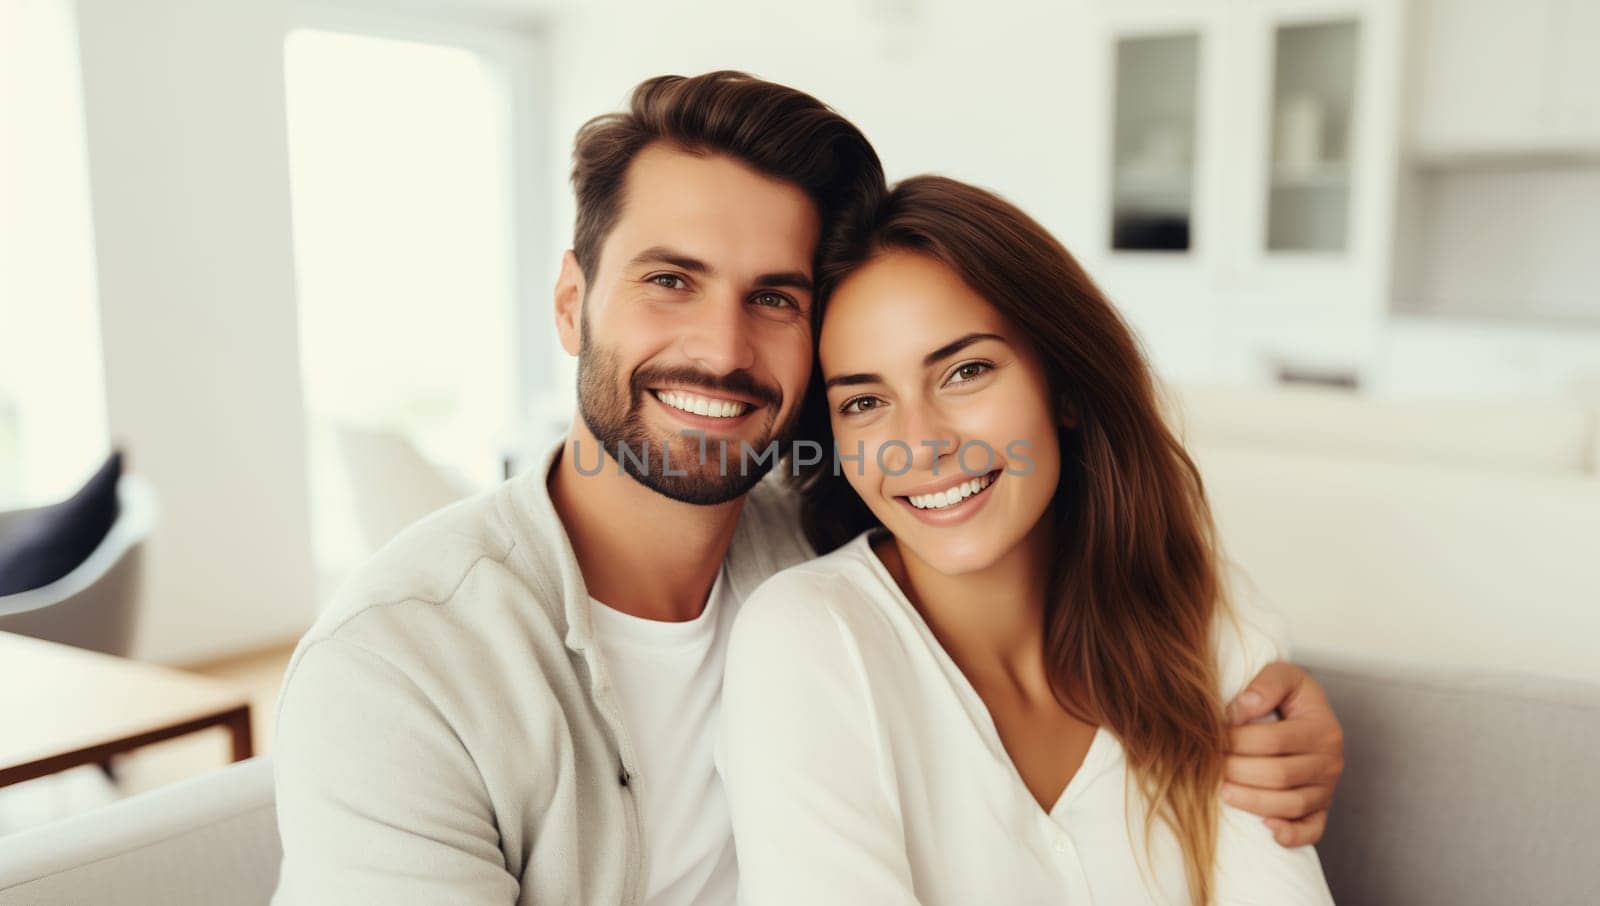 Portrait of happy smiling young couple hugging, cheerful woman and man sitting on sofa at home together